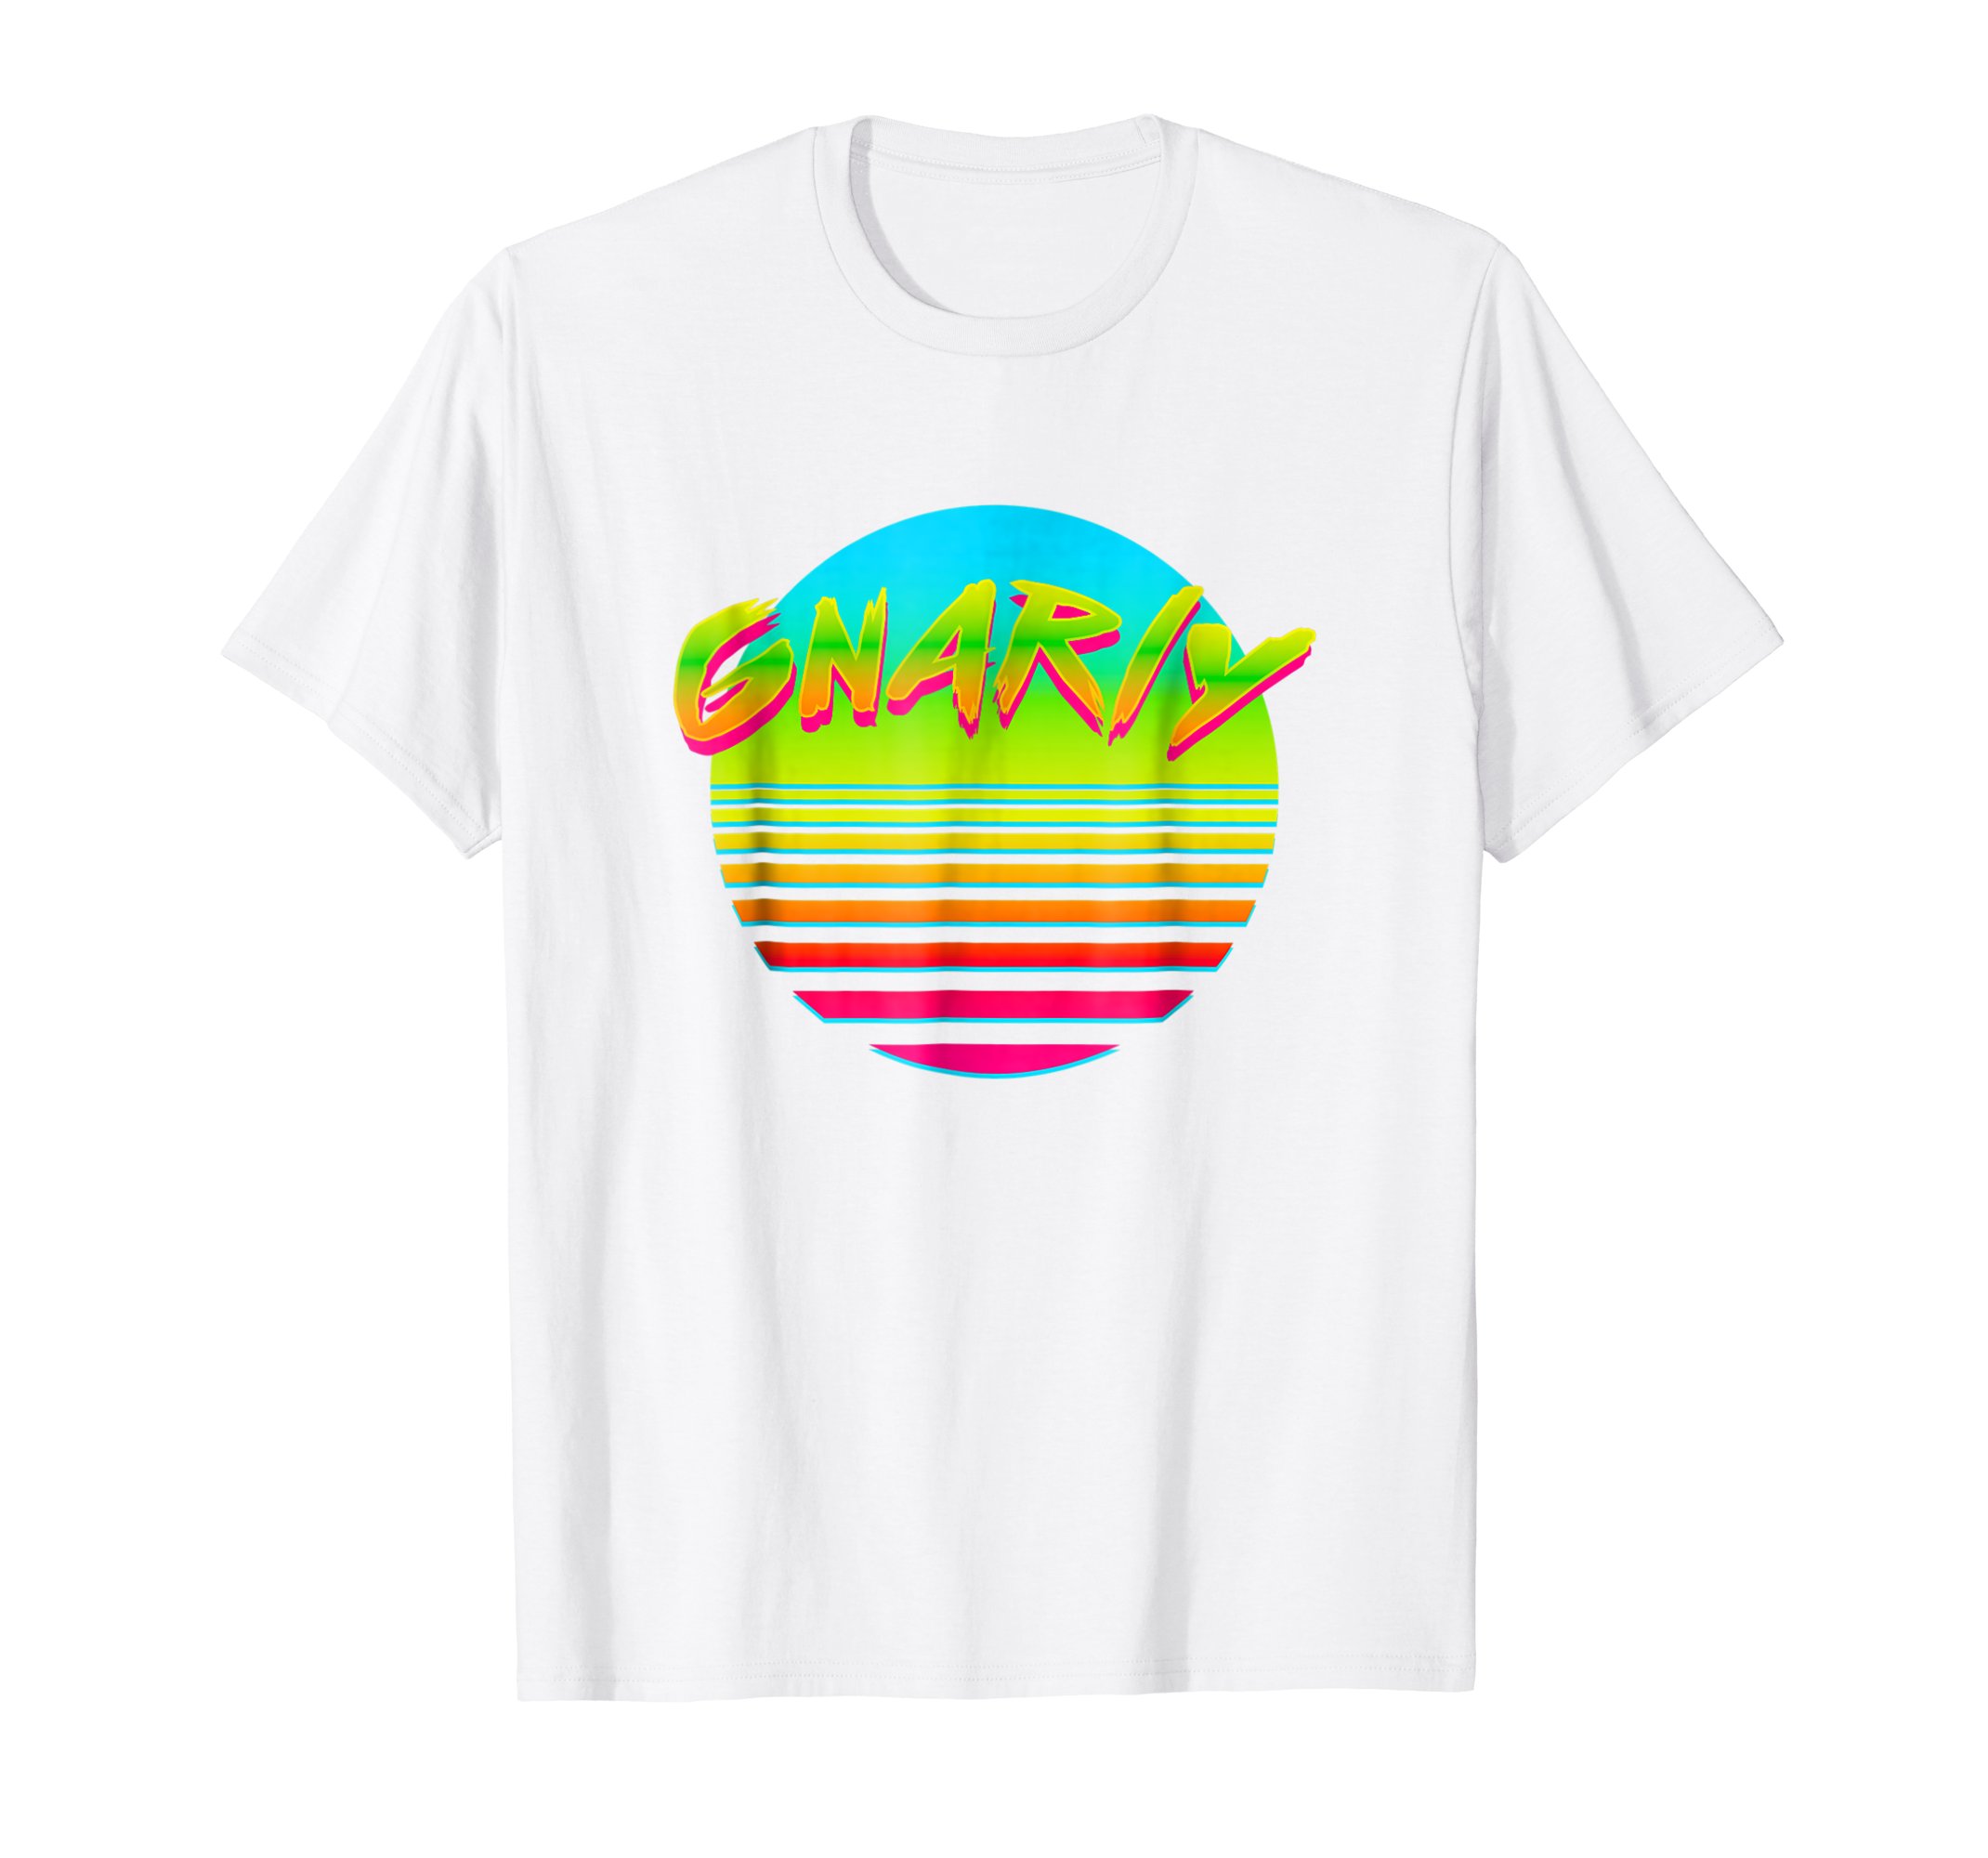 Brandon Charnell Gnarly Neon Sun Retro 80s 90s Vintage Outrun T-Shirt